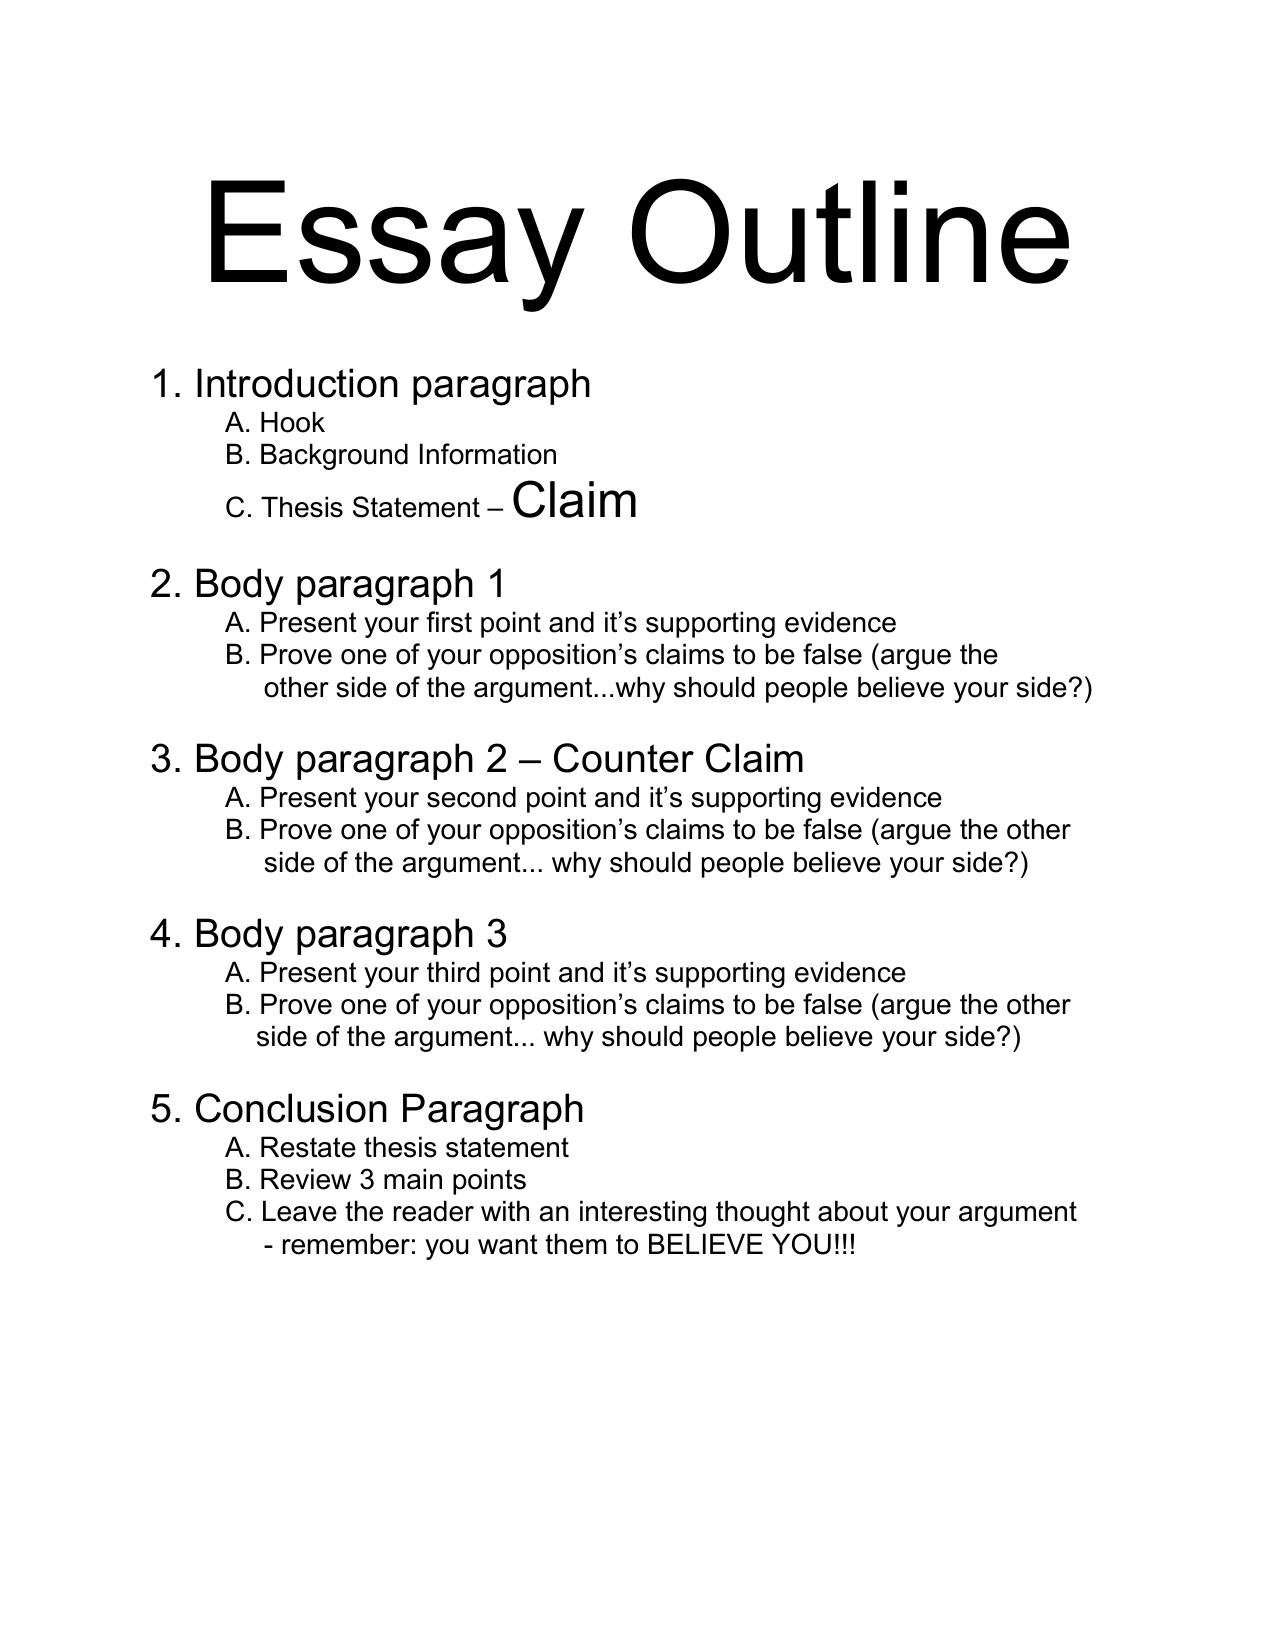 introduction of an essay outline